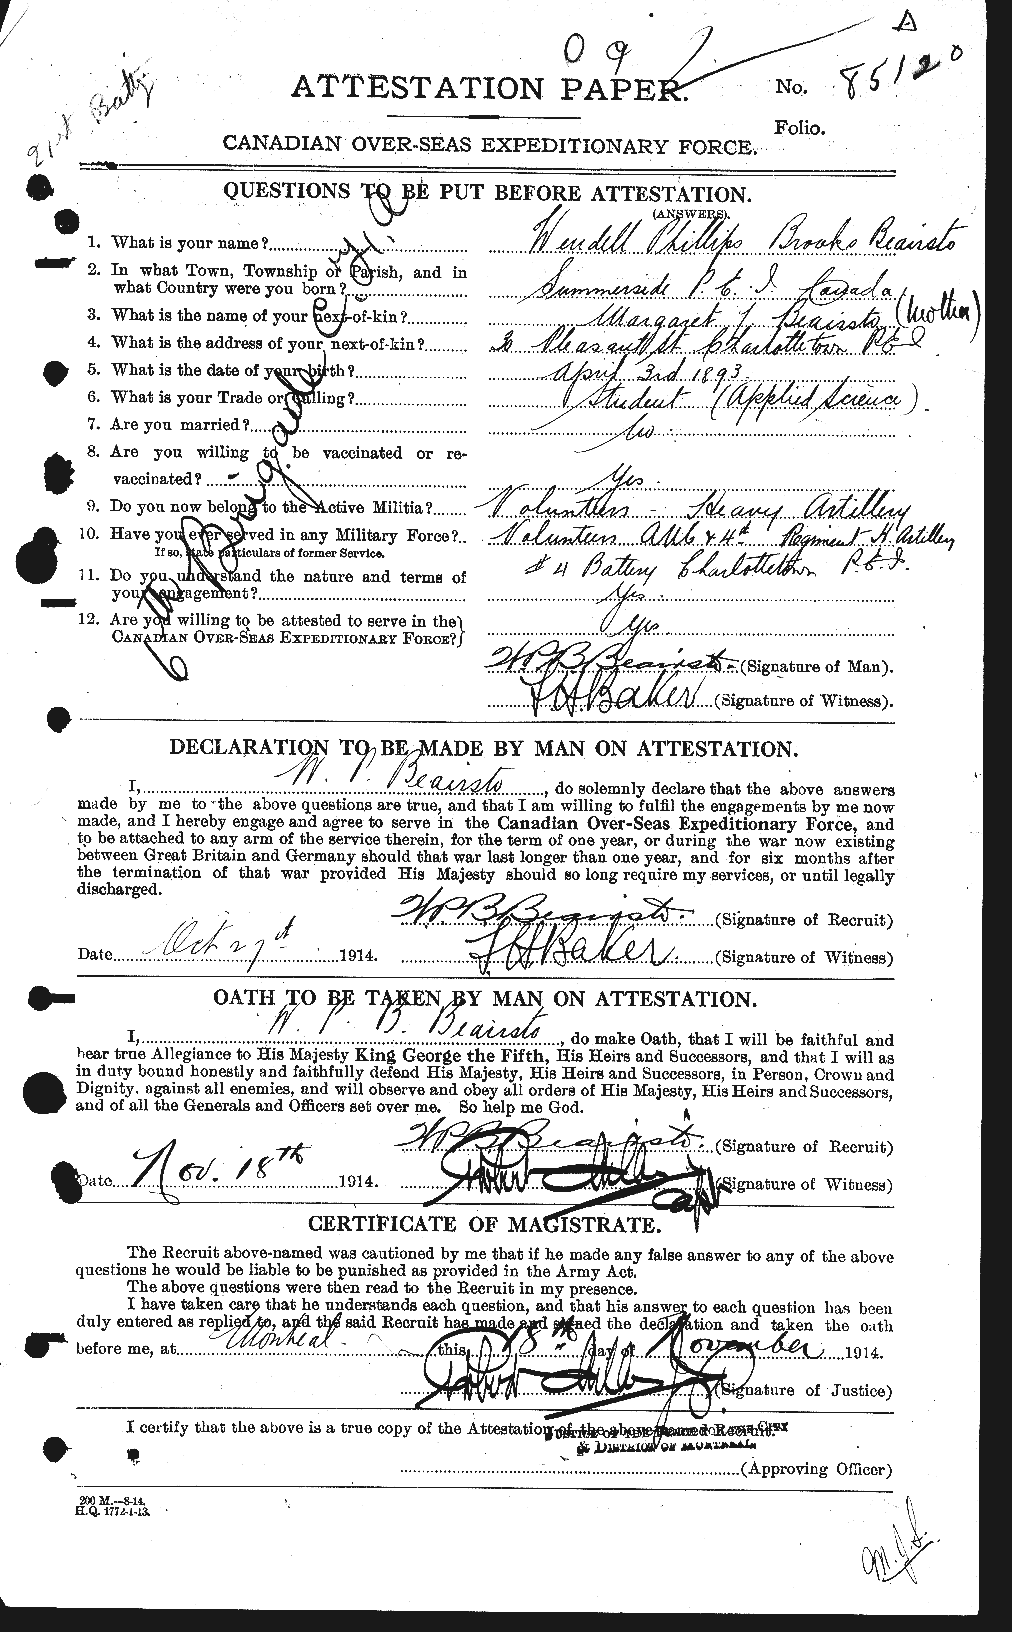 Personnel Records of the First World War - CEF 235258a